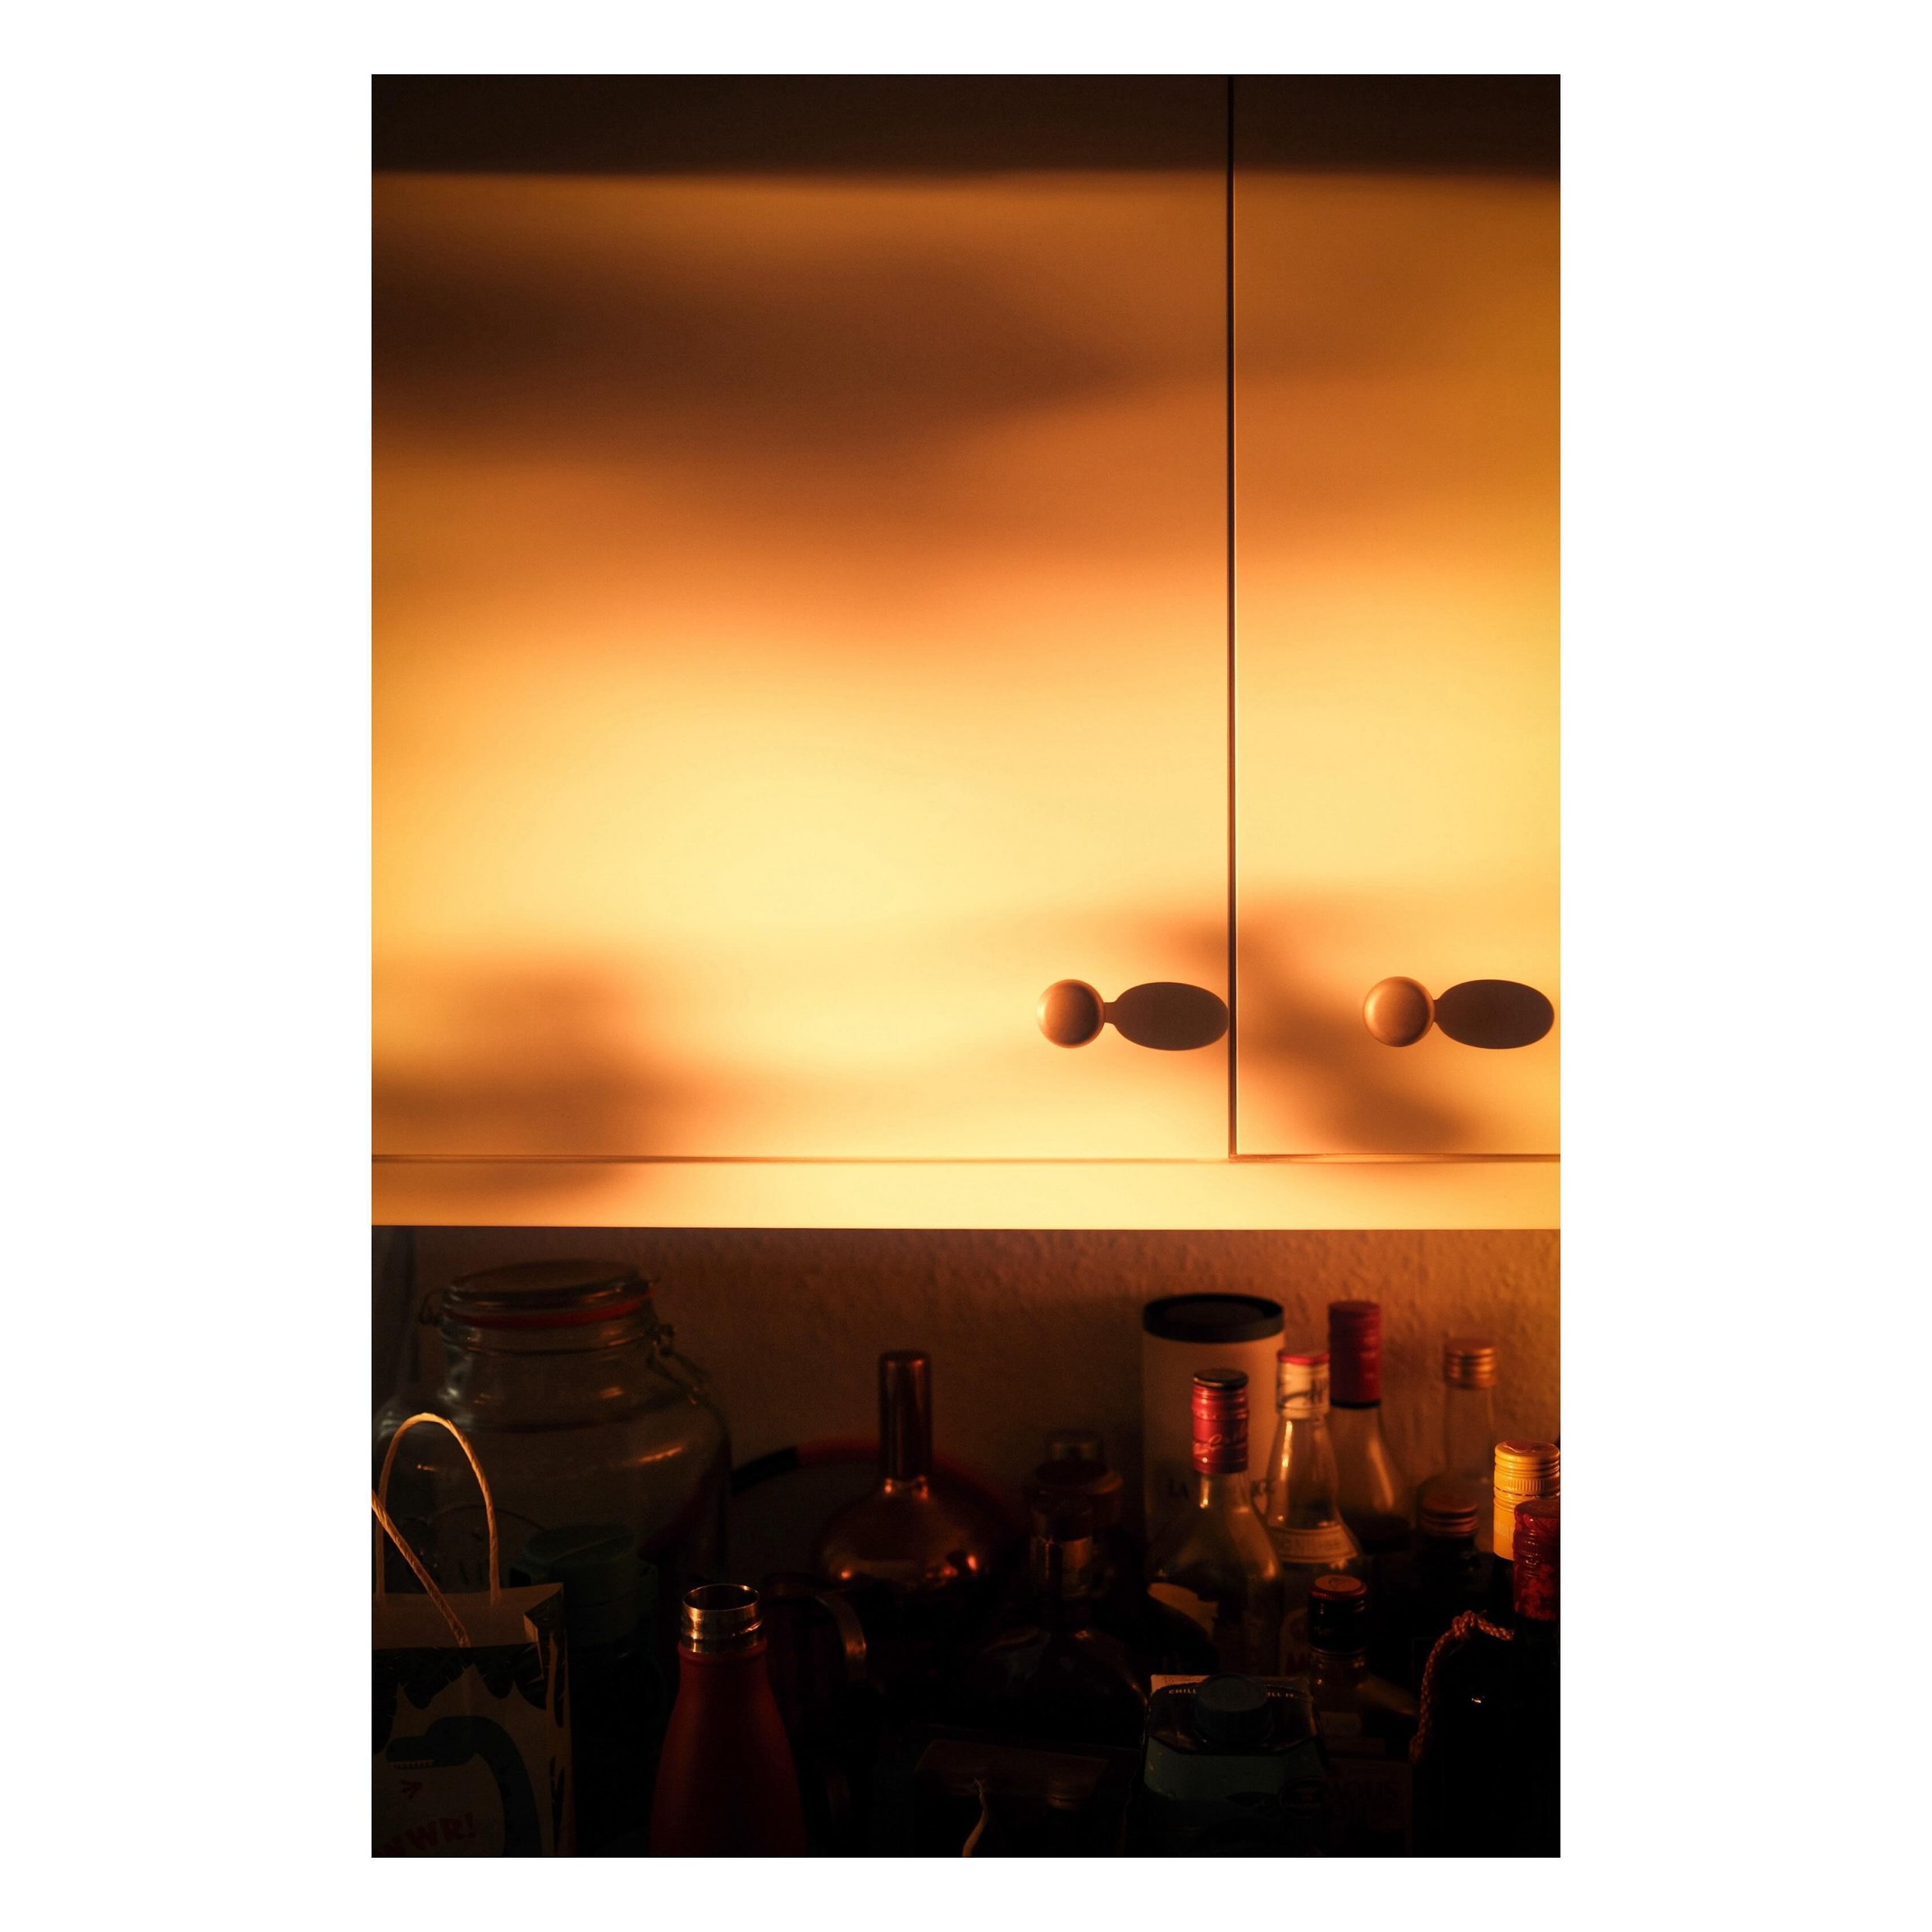 Setting sun from yonder window

#fujix100vi #stalbans #sunandshadow #duskphotography #cupboards